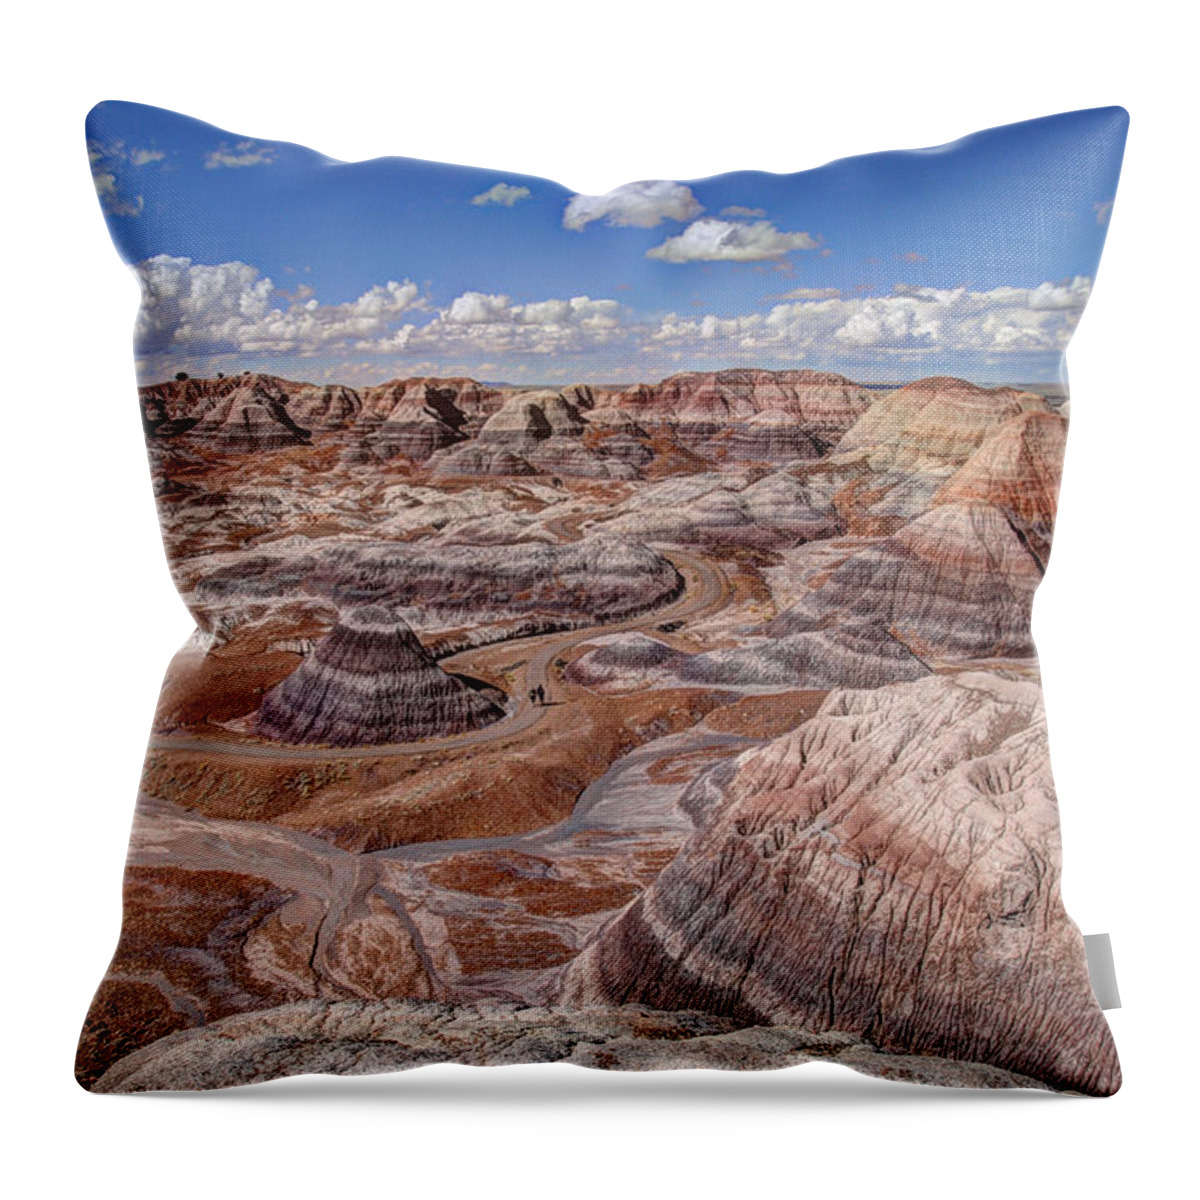 Arizona Throw Pillow featuring the photograph Petrified Forest Blue Mesa by Karen Smale